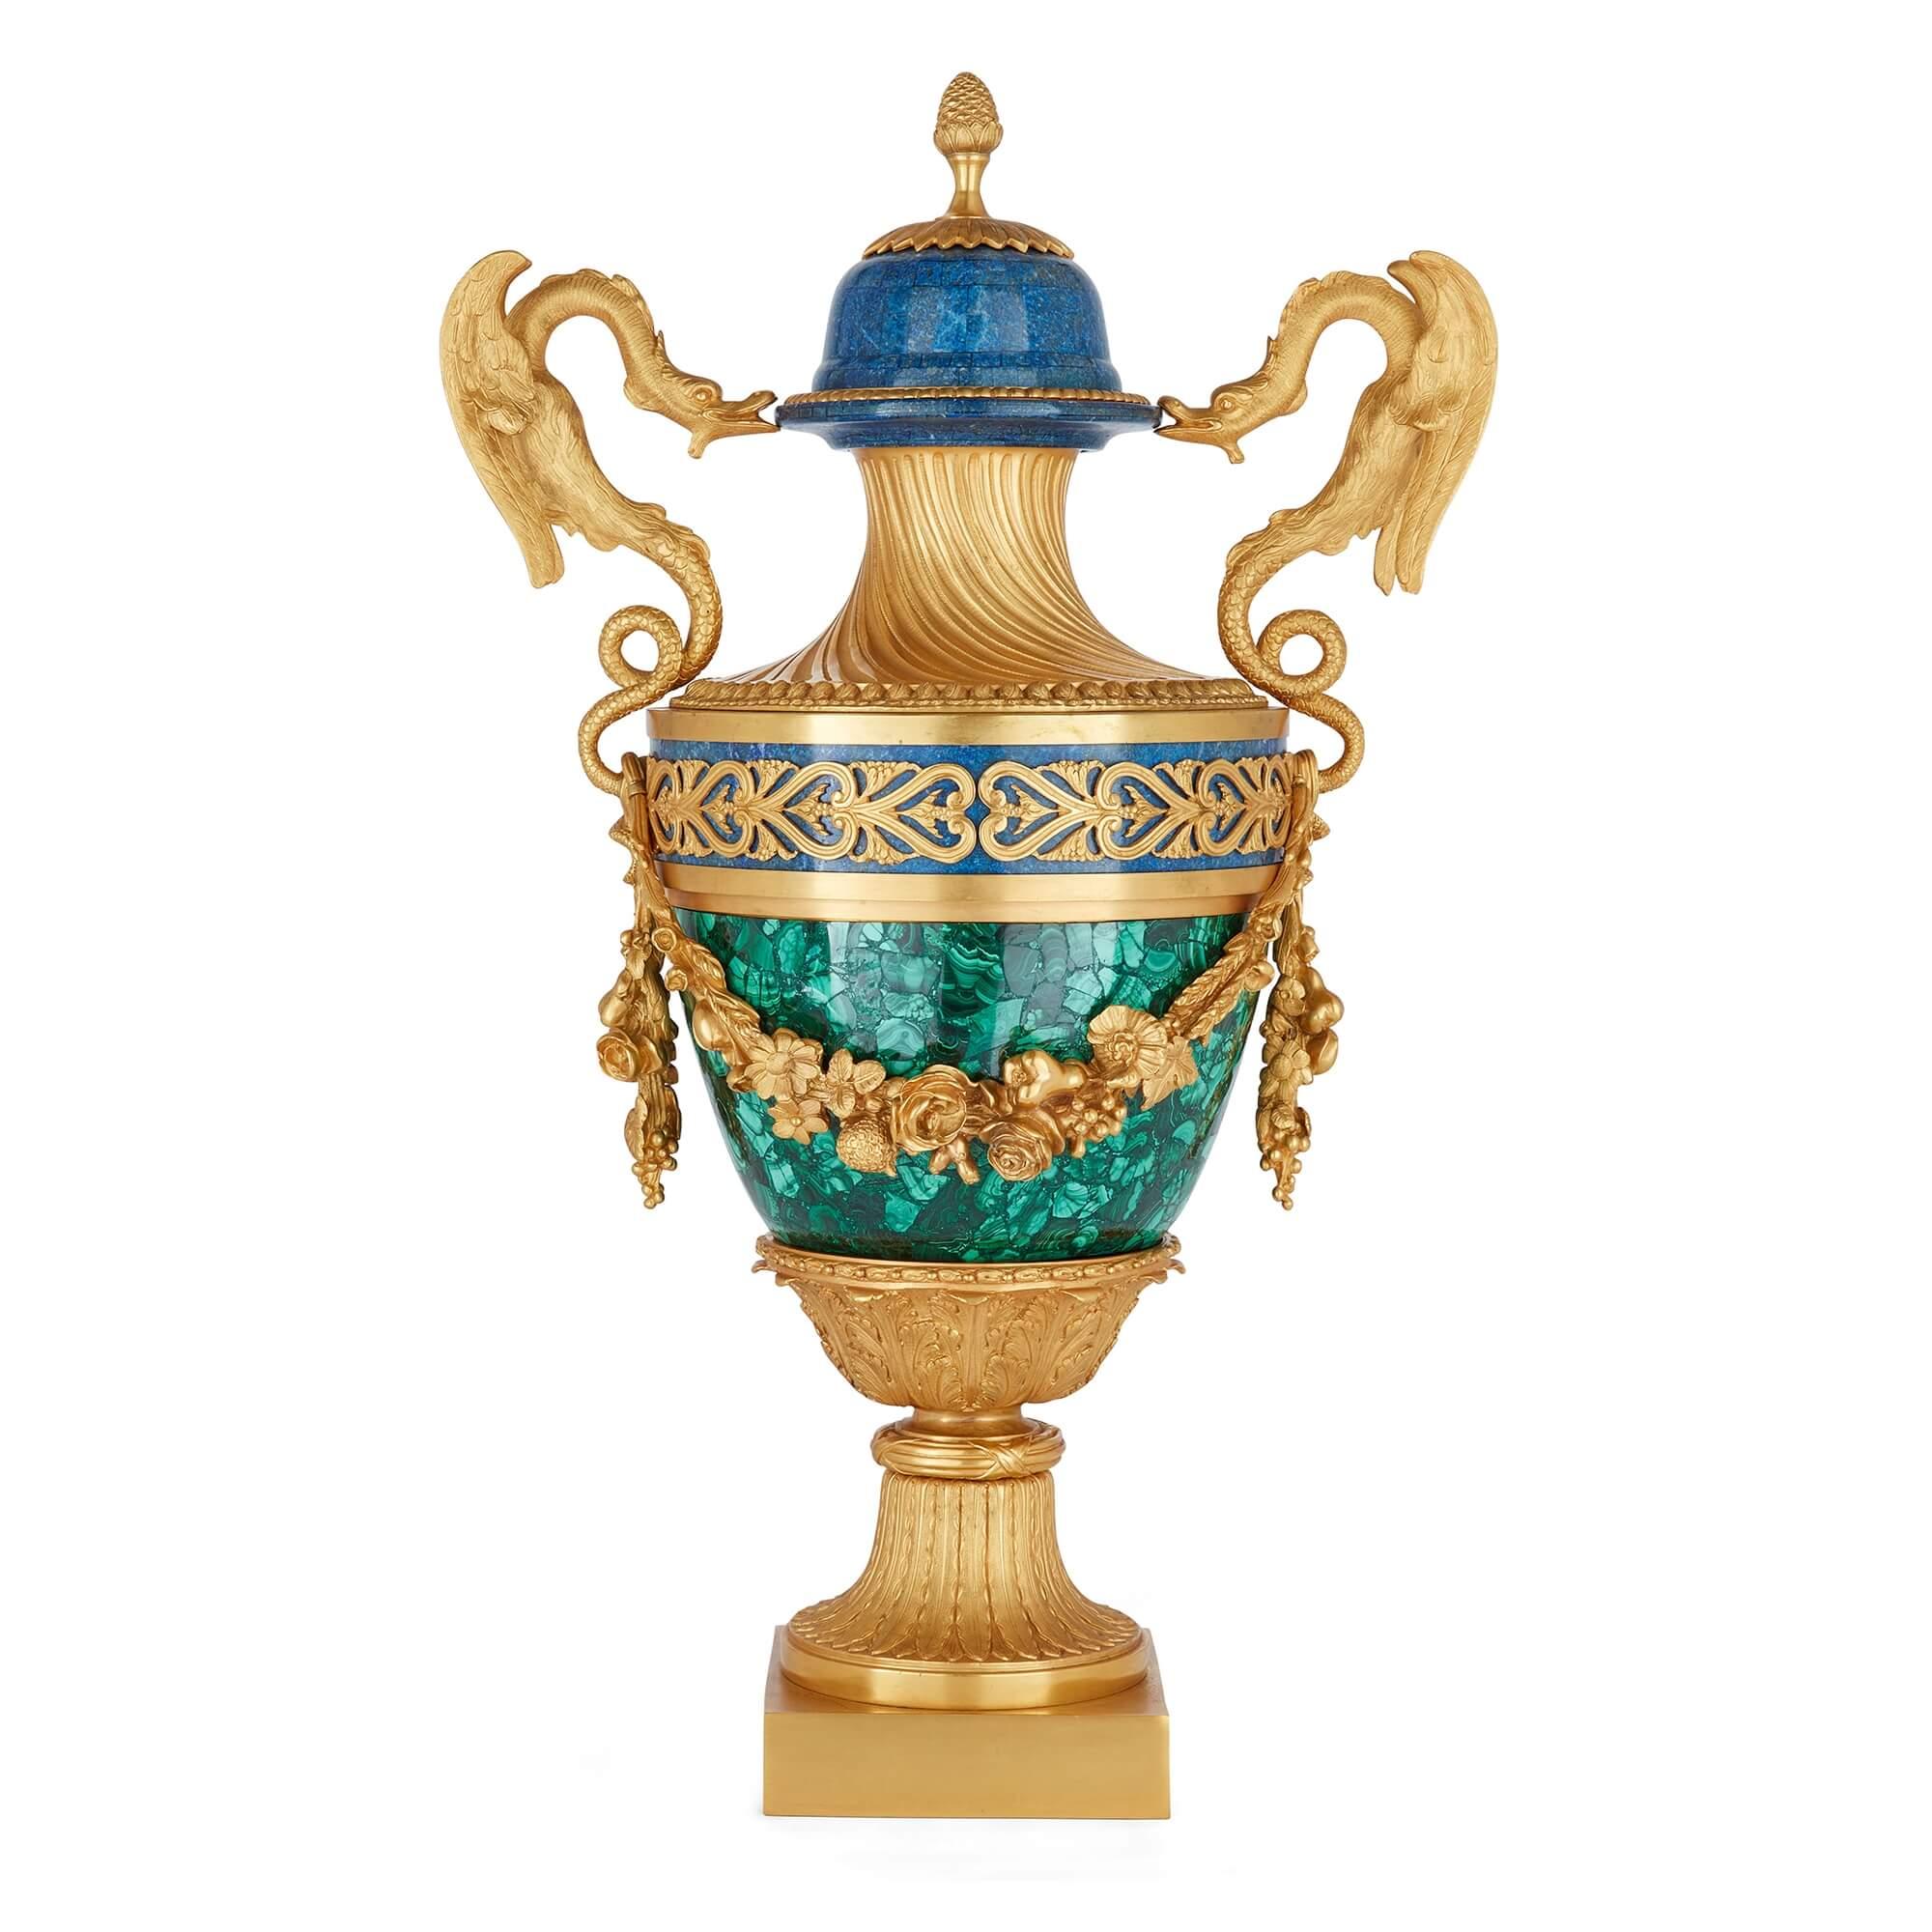 Pair of French Empire style malachite, lapis lazuli and ormolu vases
French, 20th Century
Height 78cm, width 47cm, depth 30cm

Skilfully crafted by French craftsmen, the unusual mixture of materials used for these vases makes them a very desirable